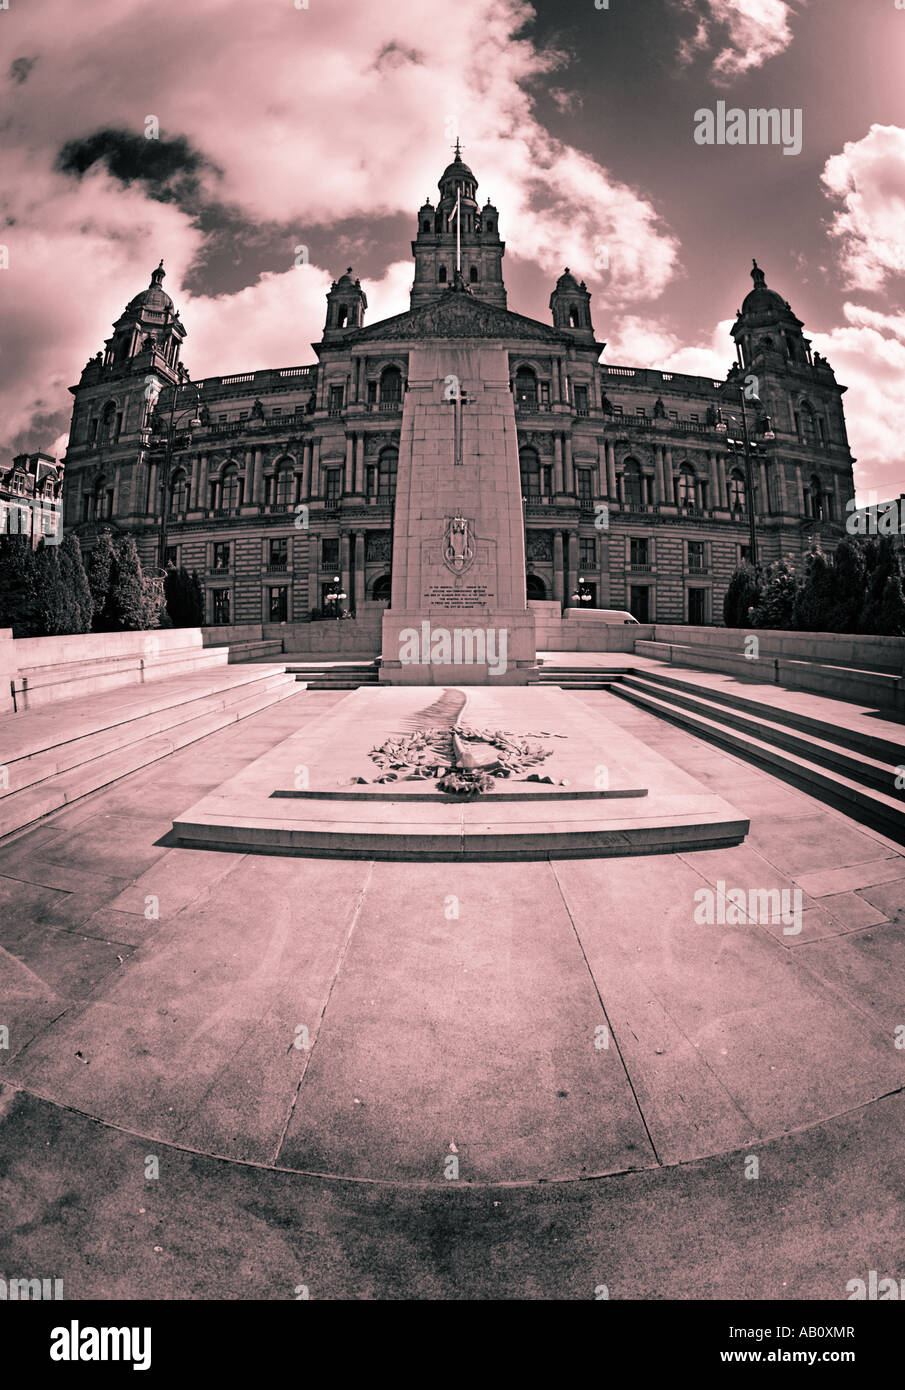 Wide angle portrait image of Georges Square and the city chambers building in Glasgow Scotland in black and white sepia Stock Photo